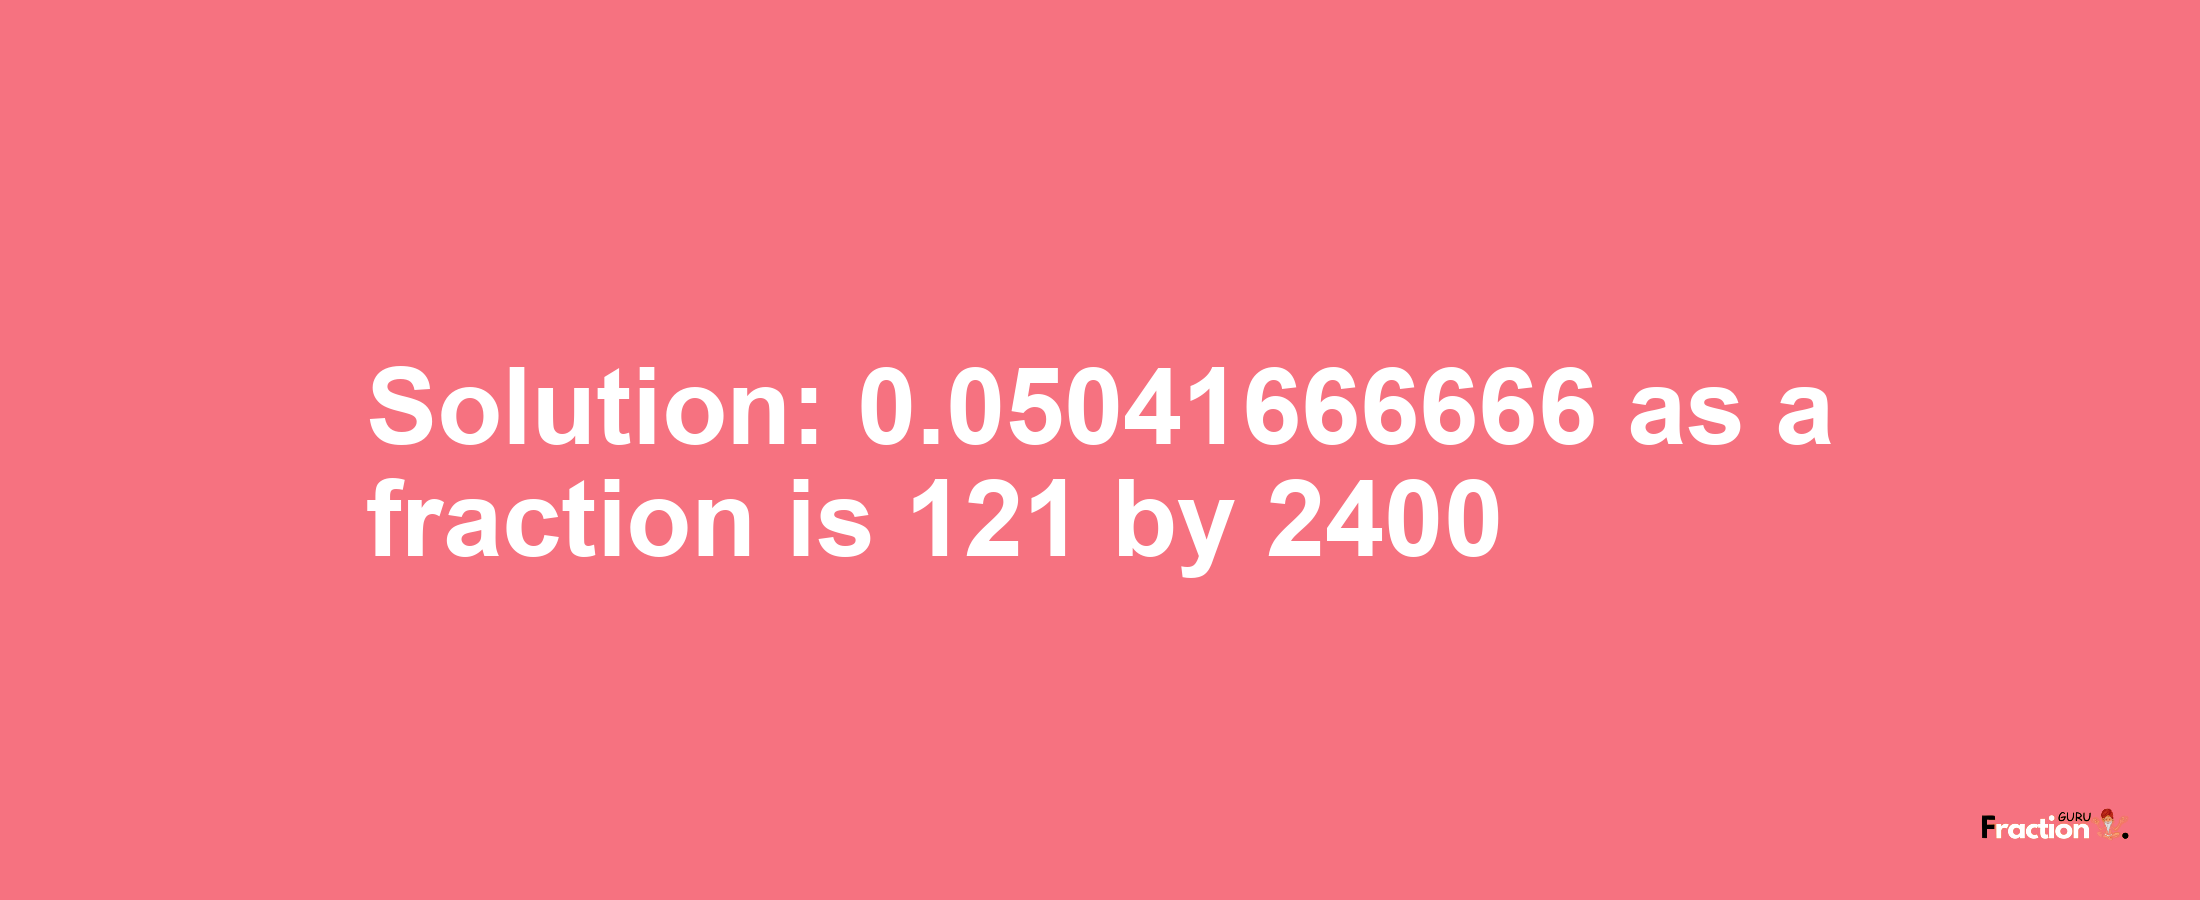 Solution:0.05041666666 as a fraction is 121/2400